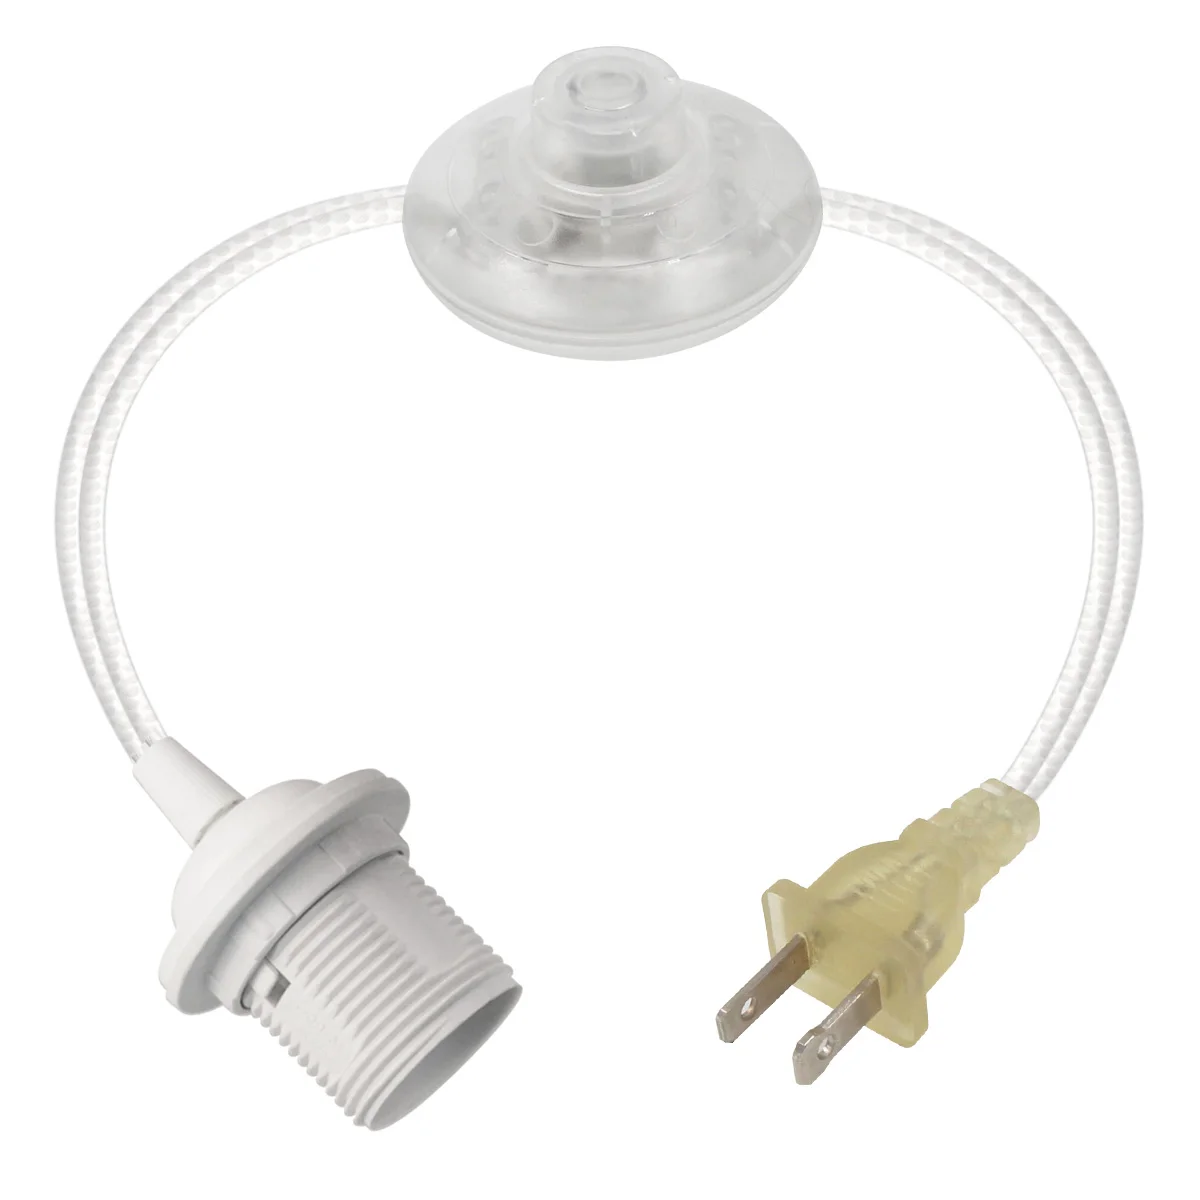 Salt Lamp Wire Us 2 Pin Plug With Dimmer E14 Lamp Cord Sets E14 Plastic Half Thread Socket - Buy Wholesale Dimmer E14 Lamp Cord Usa,Eu/uk/us/au Salt Lamp Power Cord